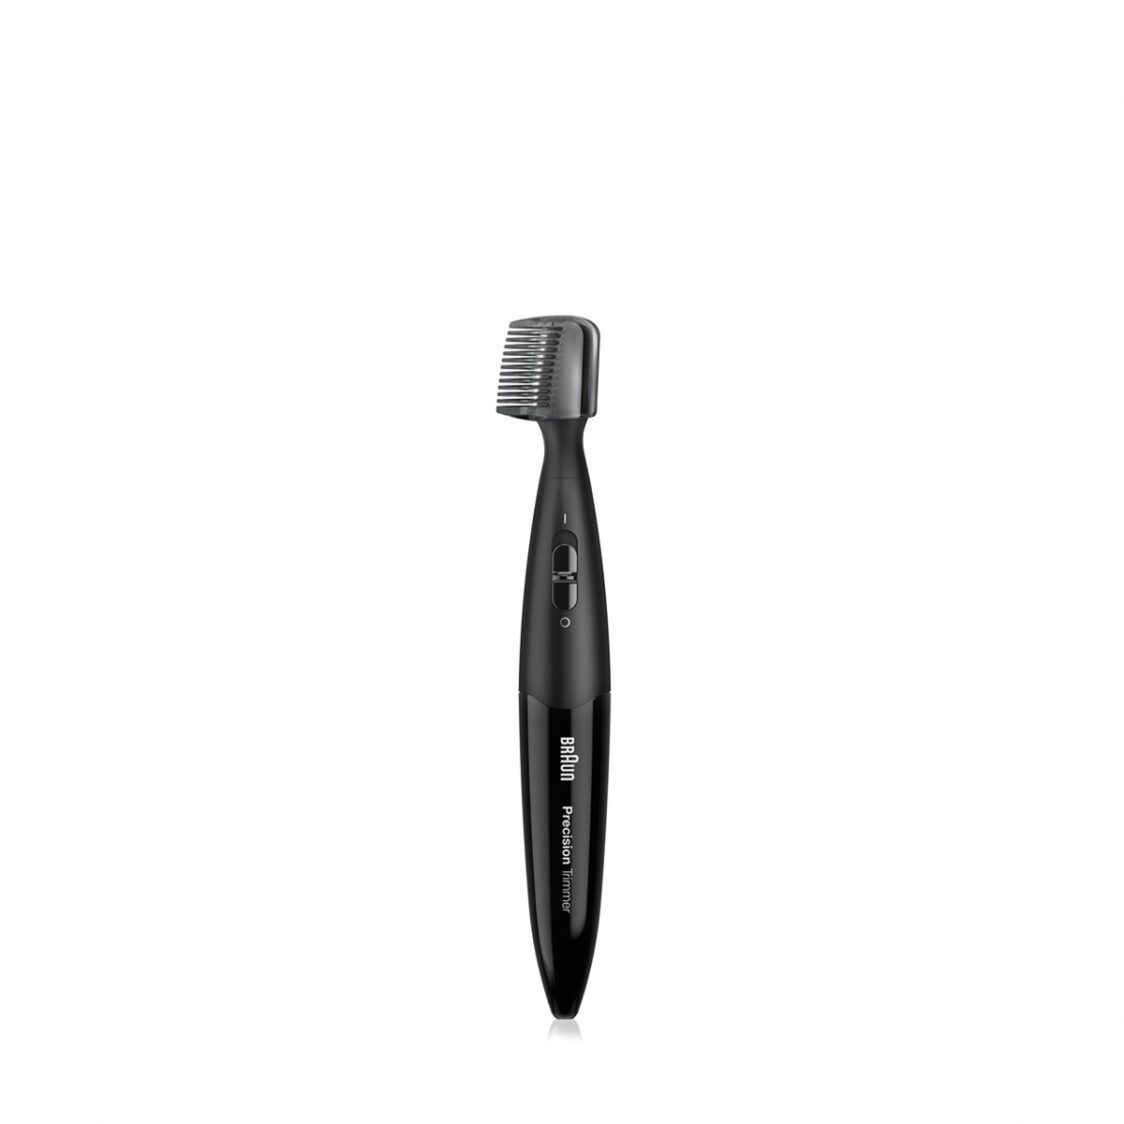 BRAUN PT 5010 Hair Precision Trimmer with Comb Attachment and Stand